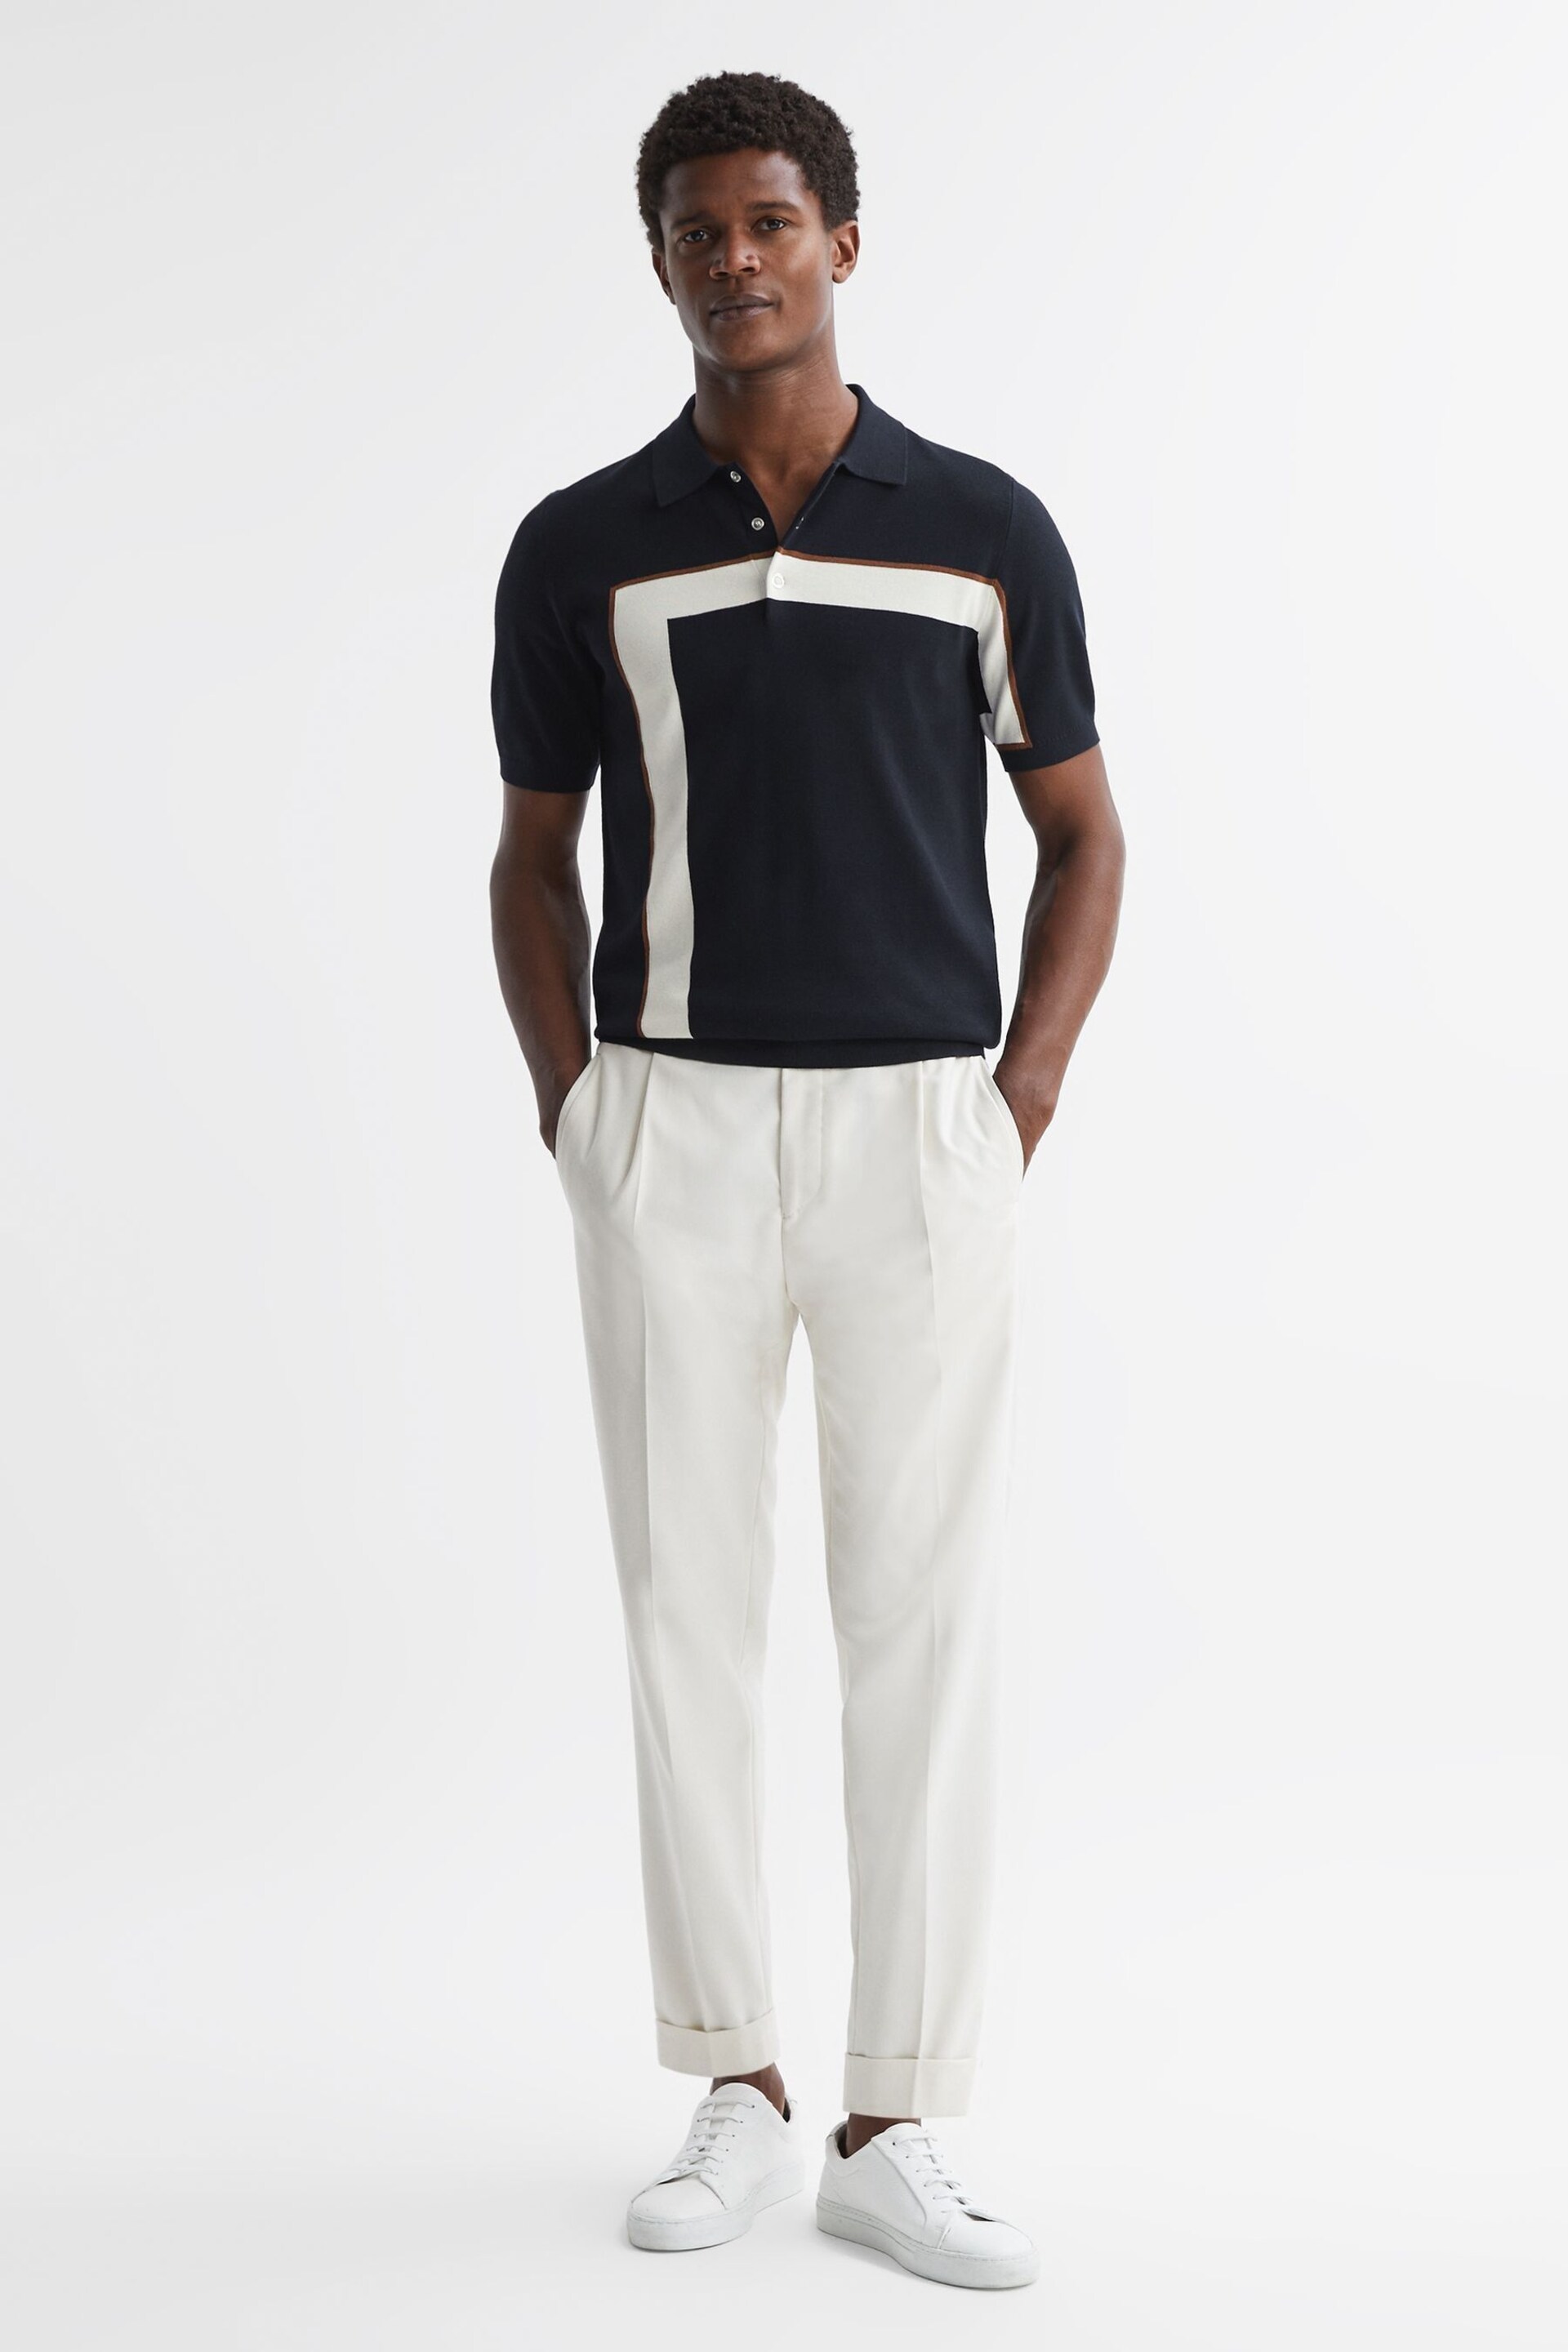 Reiss Navy Bello Striped Polo T-Shirt - Image 3 of 4